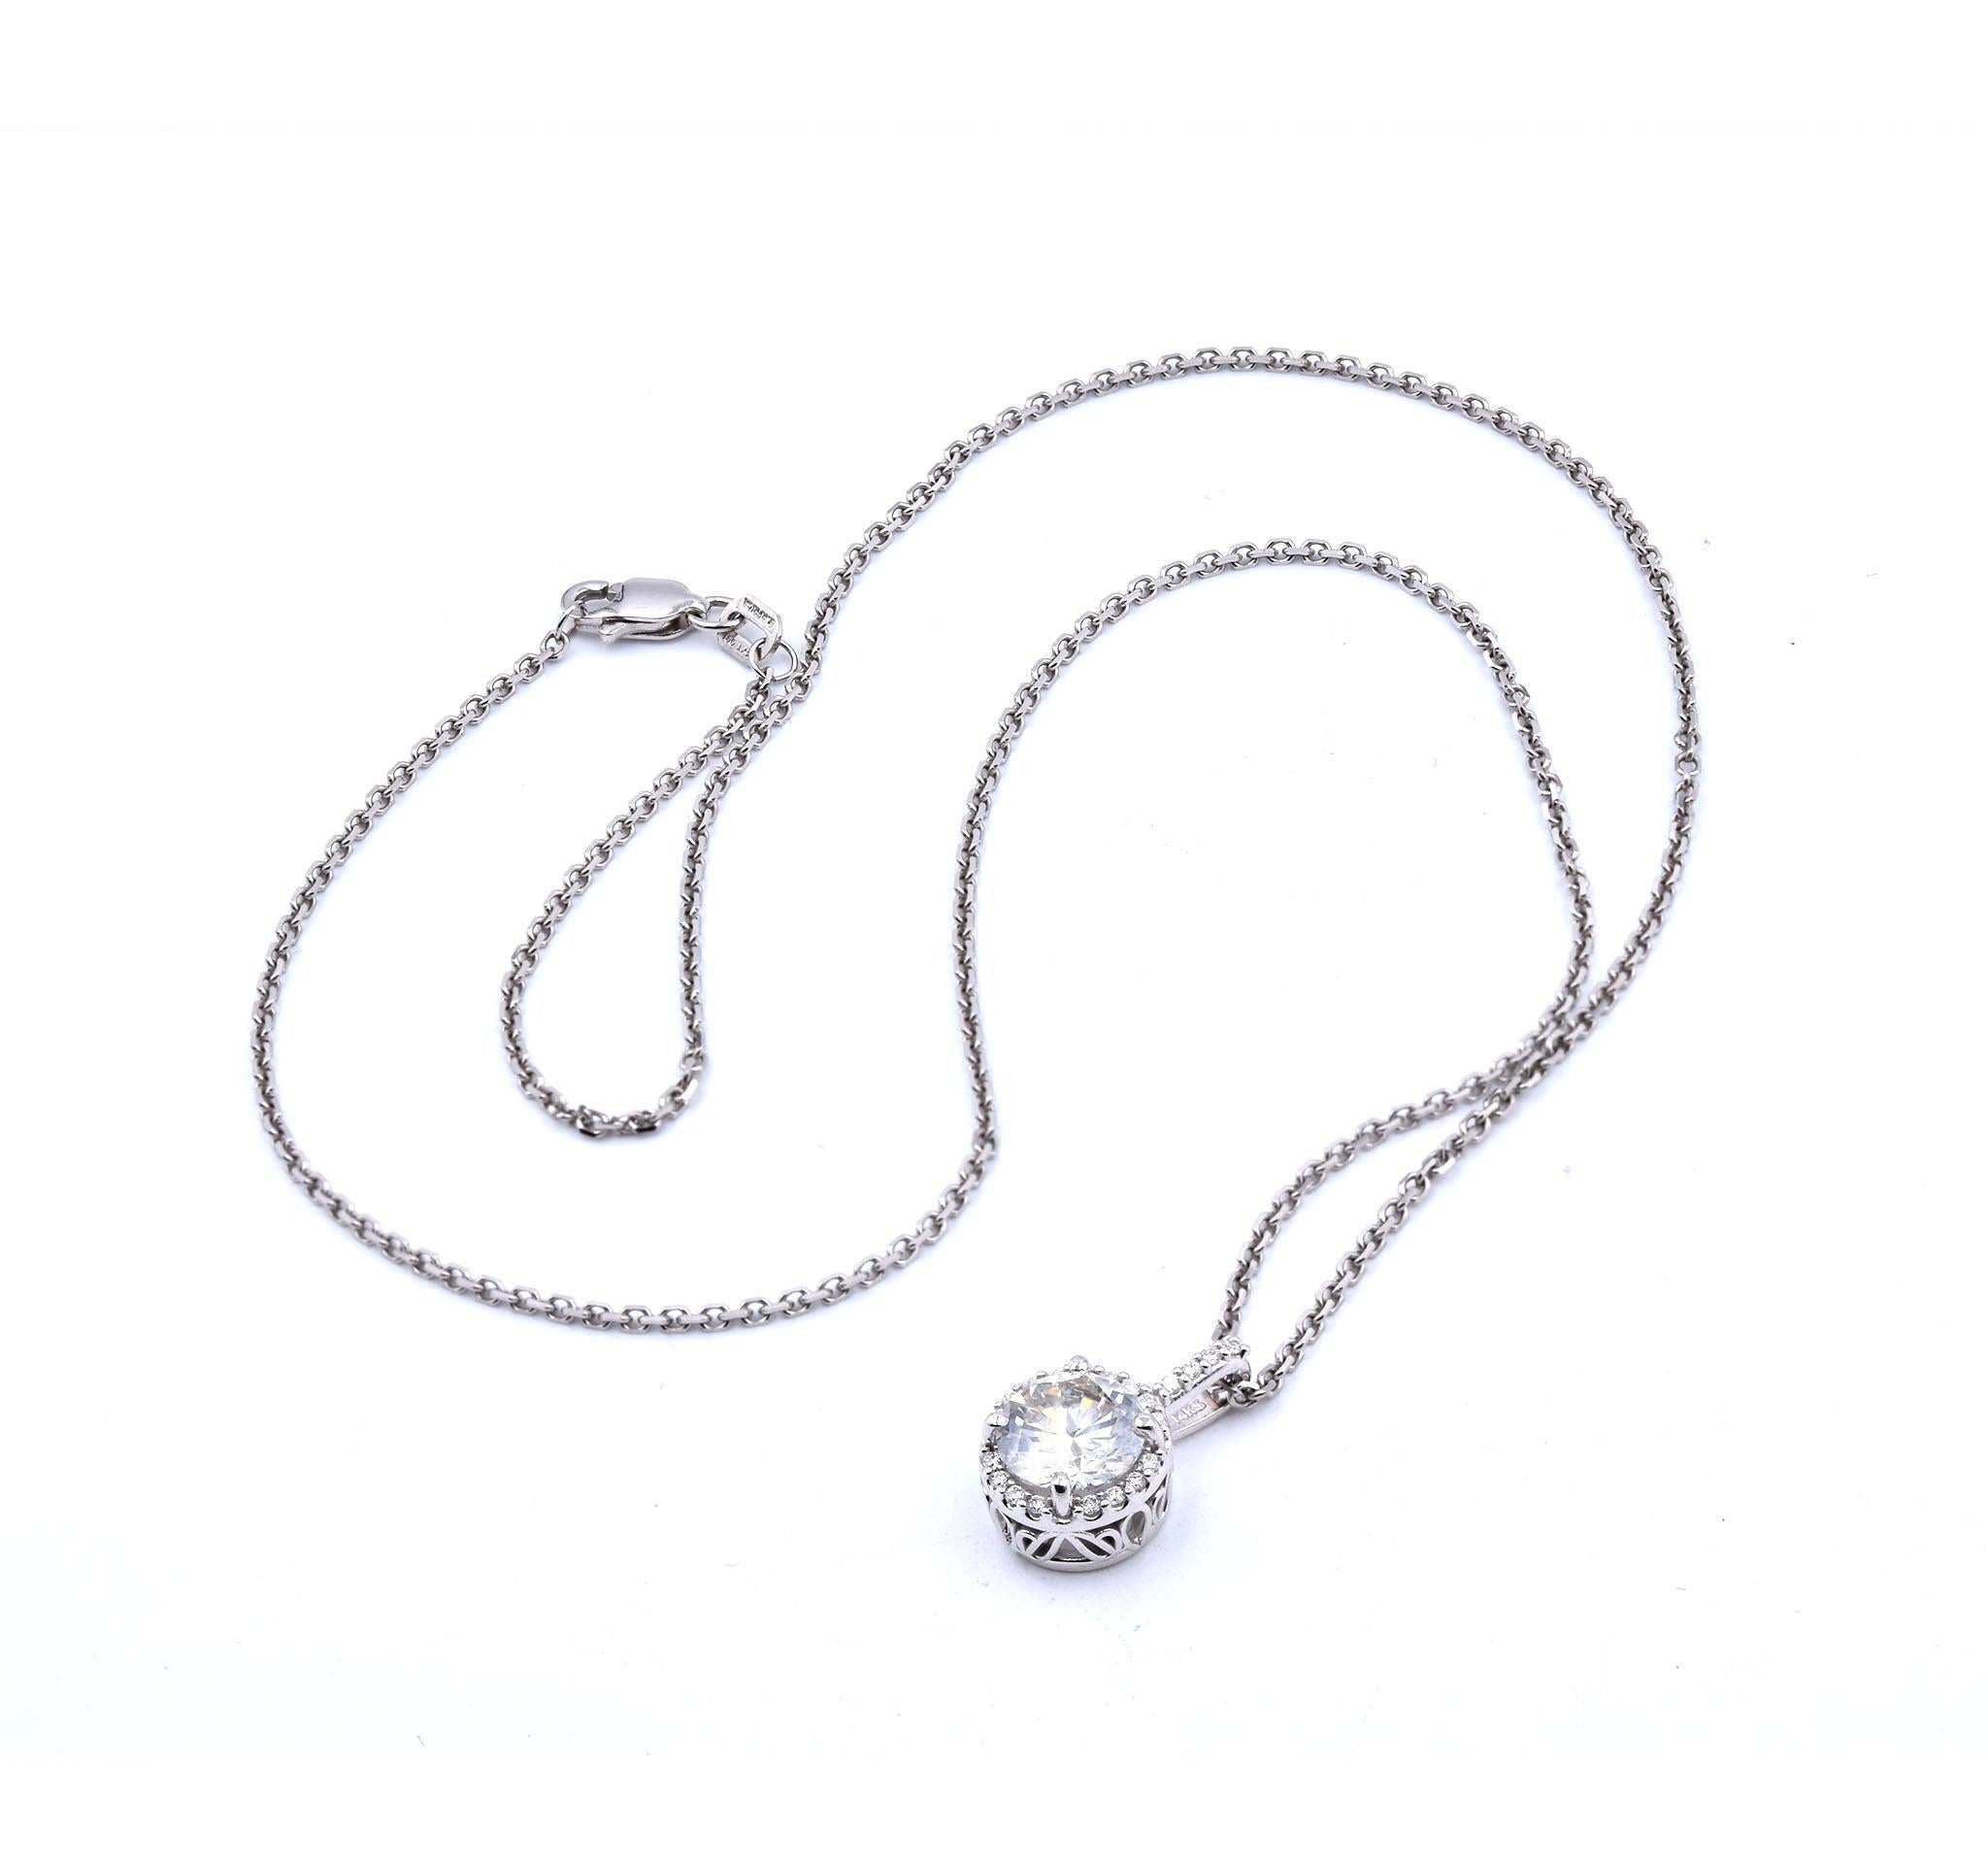 Designer: Custom
Material: 14K white gold
Center Diamond: 1 round brilliant cut = 1.42ct
Color: L/M
Clarity: I1 – Clarity Enhanced
Diamonds: 20 round brilliant cut = .20cttw
Color: G
Clarity: VS
Dimensions: necklace measures 18-inches
Weight: 4.60